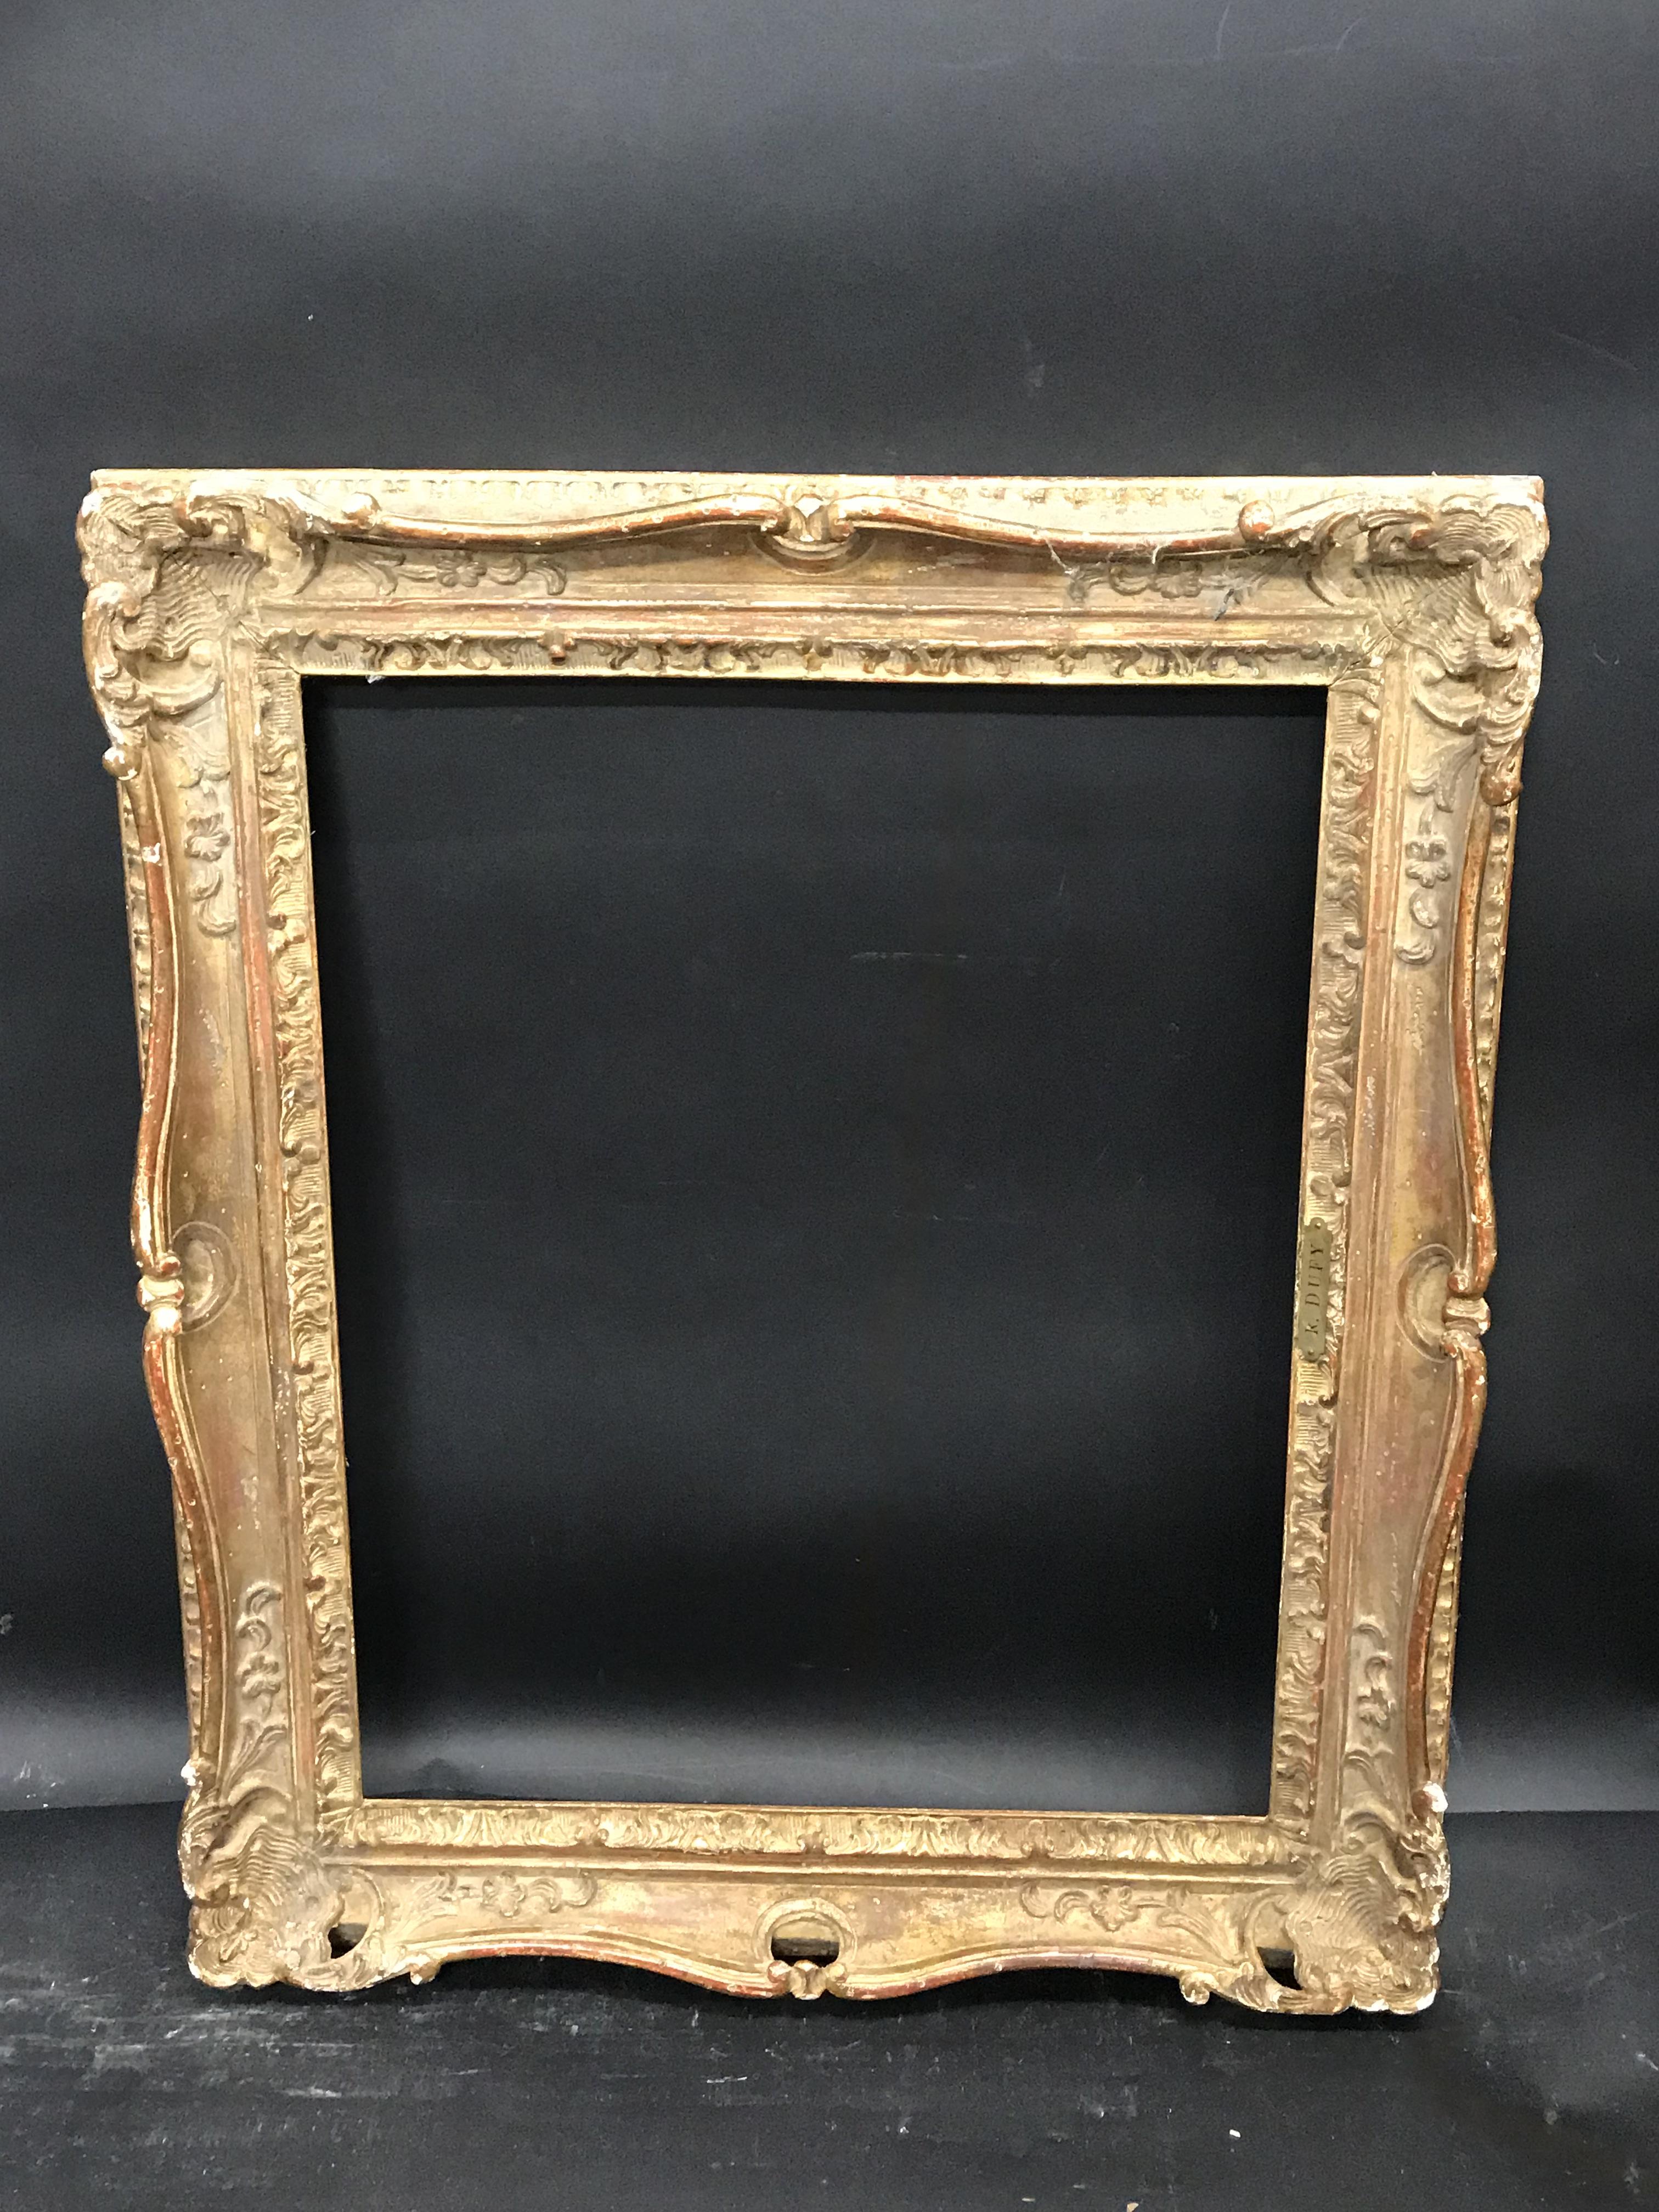 20th Century French School. A Carved Giltwood Frame, with Swep and Pierced Centres and Corners, 15. - Image 2 of 4